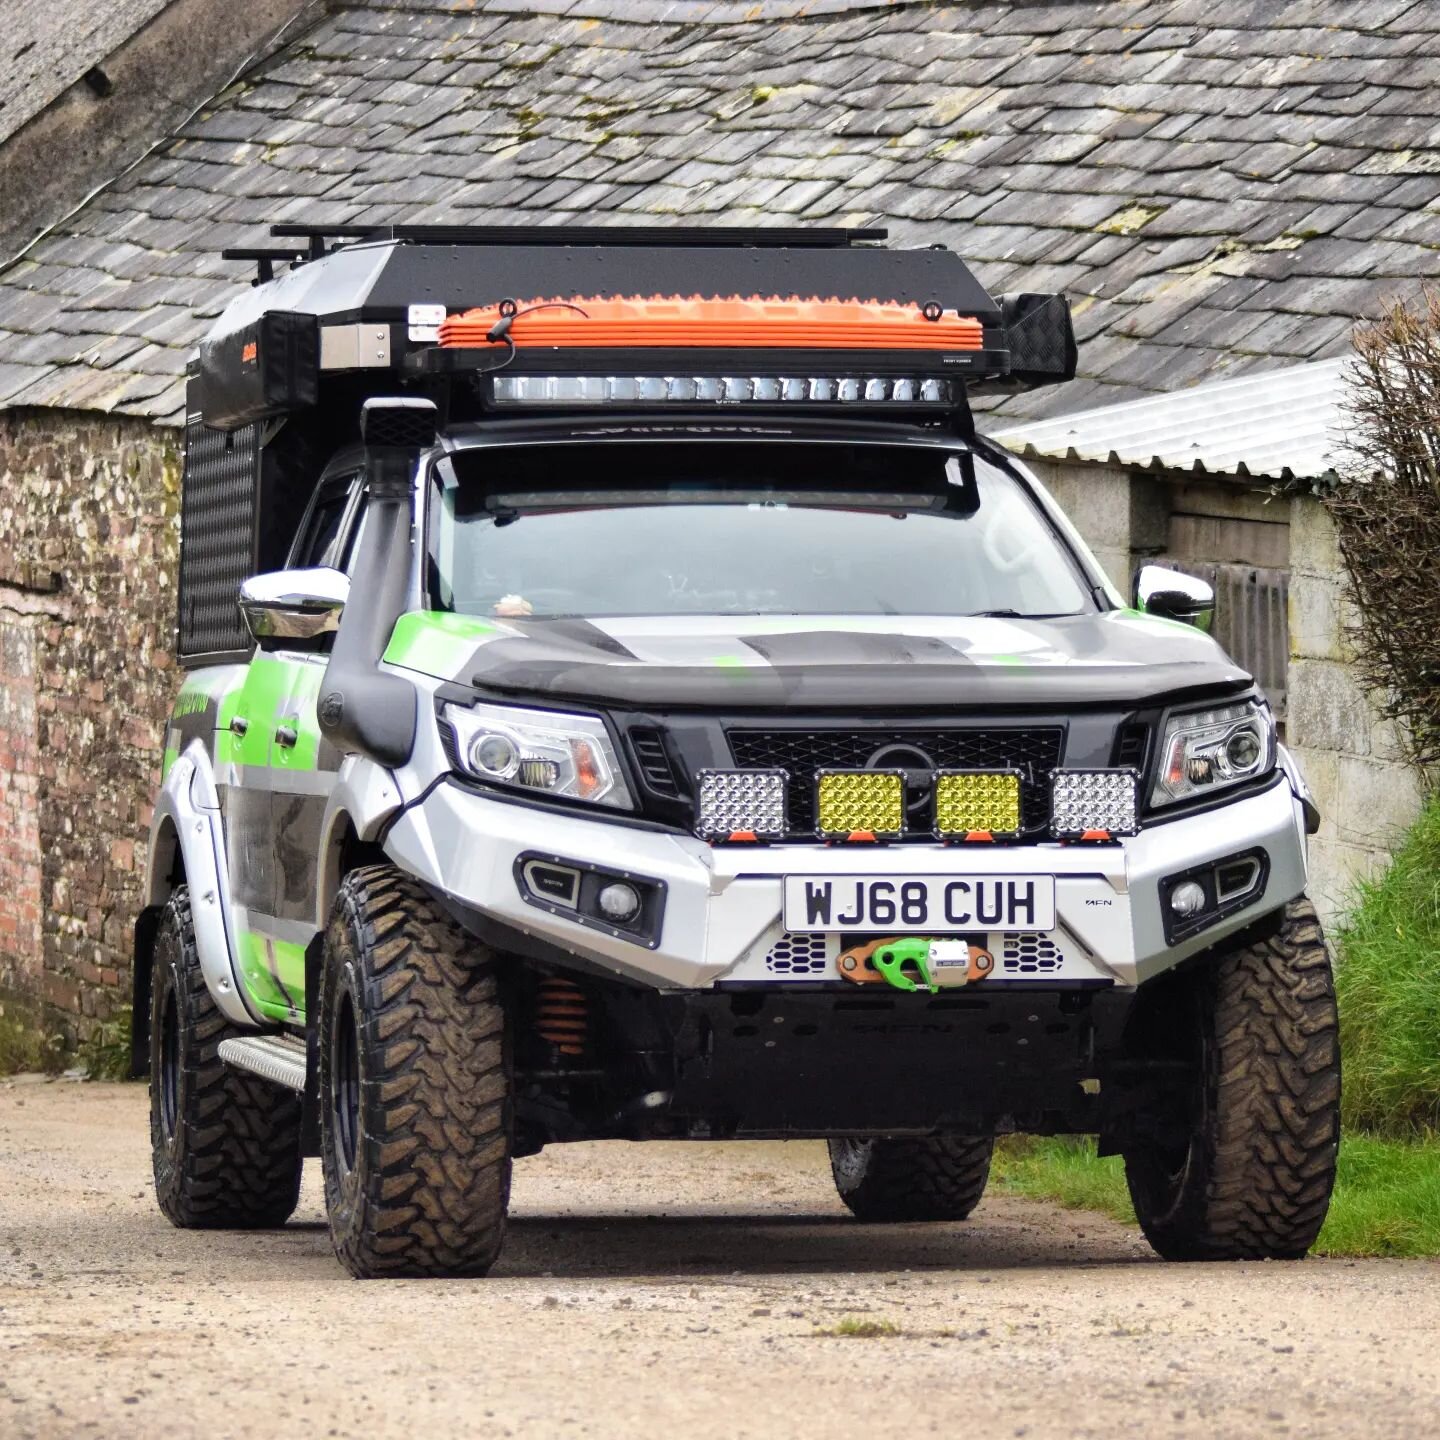 Re-introducing one of our biggest and most detailed builds to date! @iam_thecake 's epic Navara has undergone extensive works while at LAO. Ranging from suspension work, chassis bracing, onboard air system, interior fit out, underbody protection, and